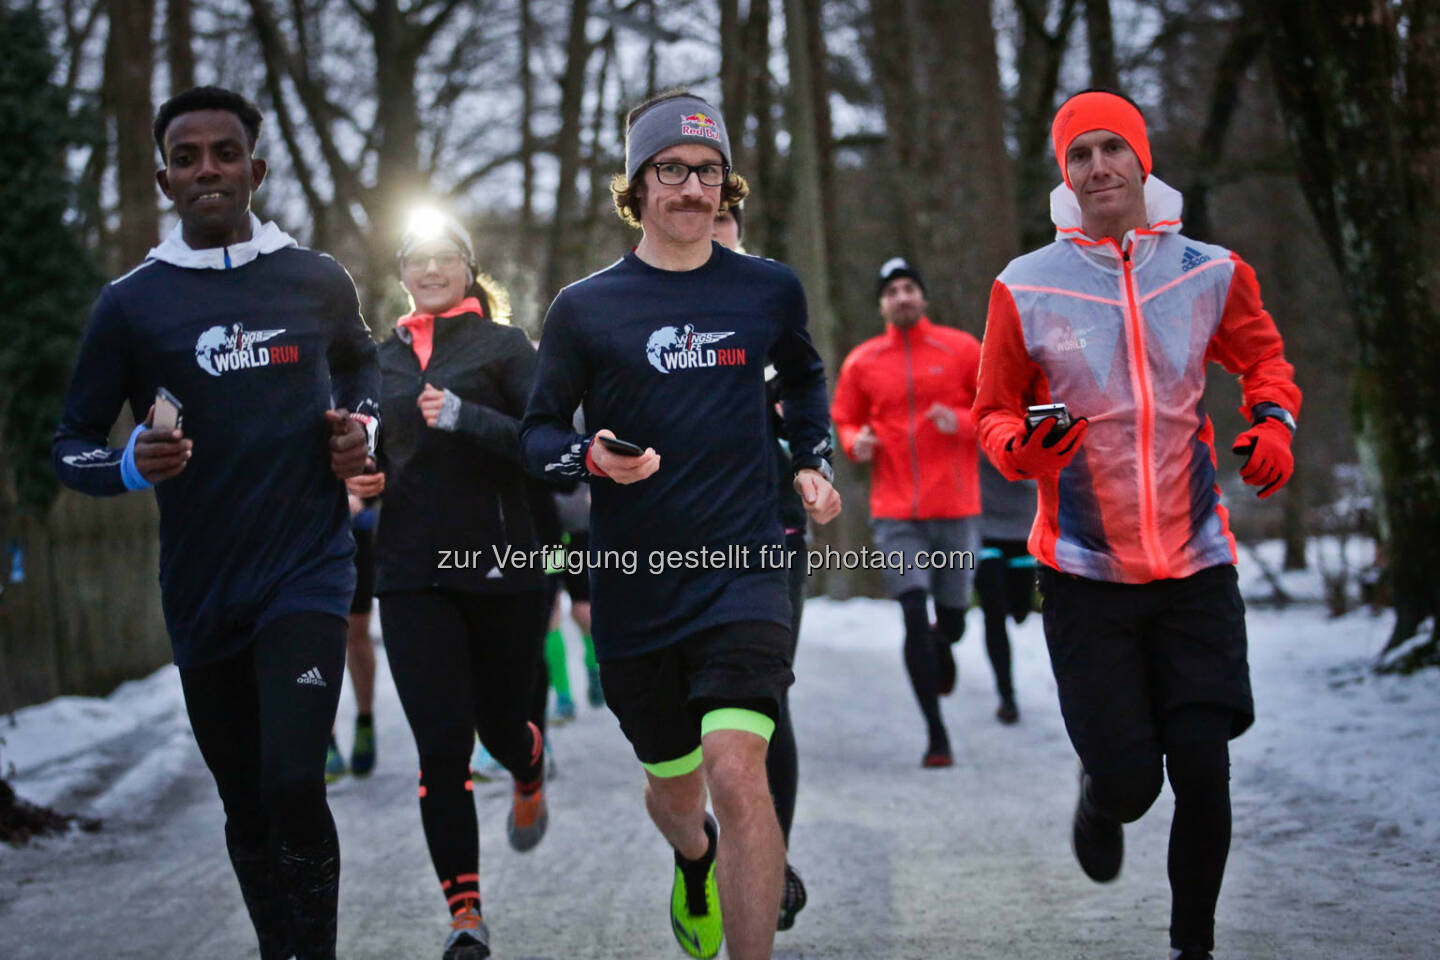 Florian Neuschwander ( middle ) and 
Lemawork Ketema ( left ) with participants at the Wings for Life World Run event in Munich 23rd of January 2016 (Bild: Daniel Grund)